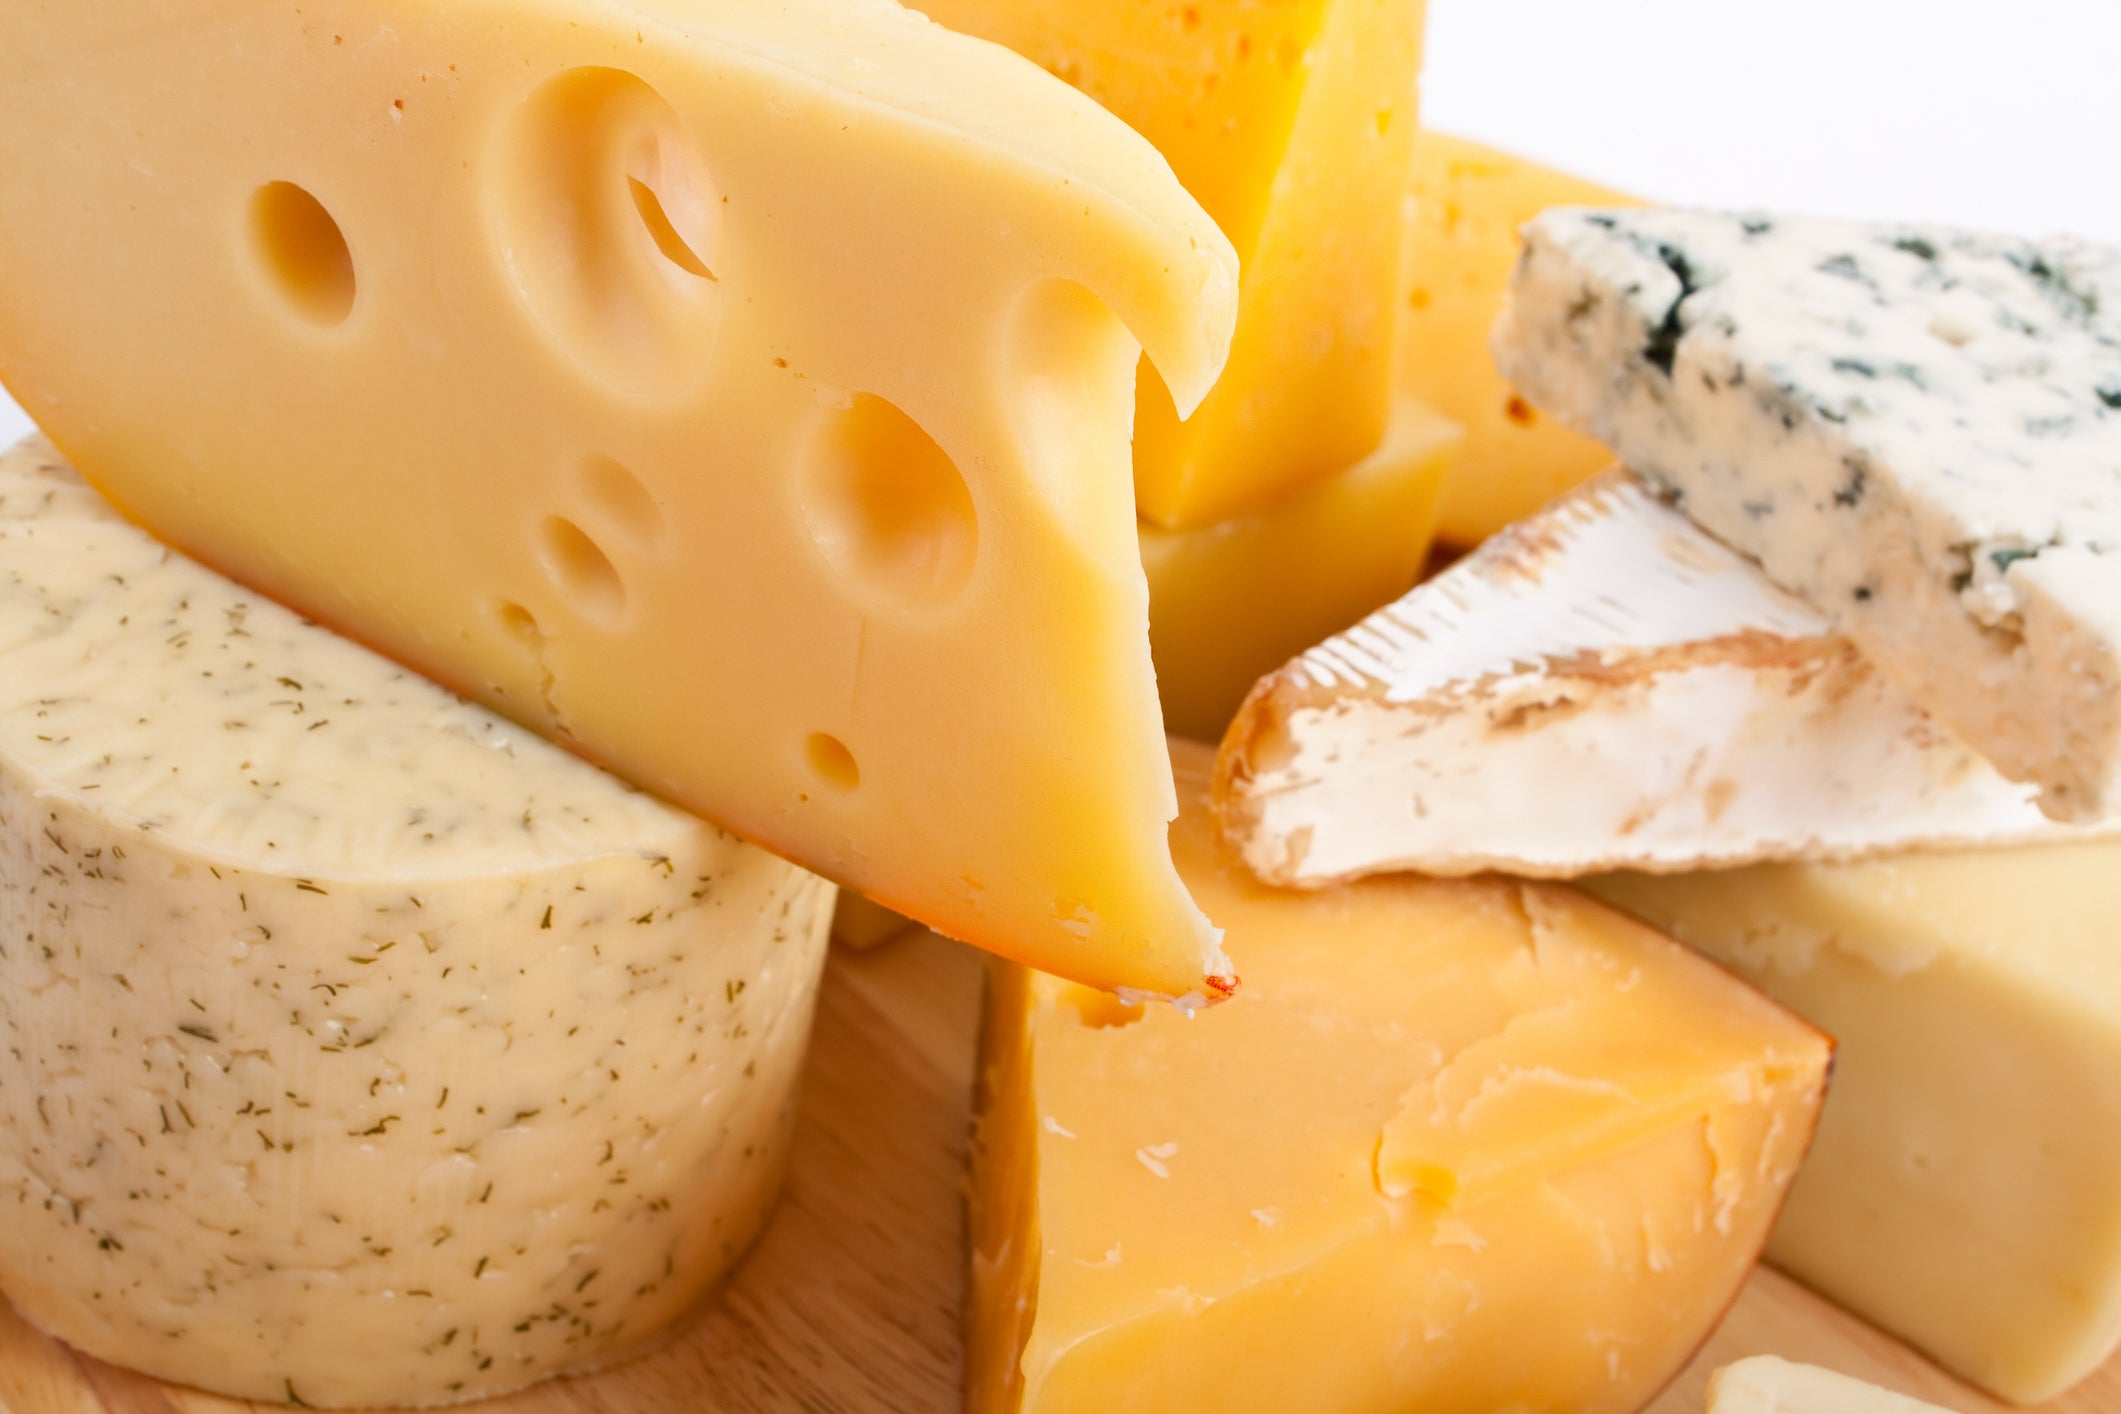 This company will play someone $10k to eat cheese for a year, how to apply